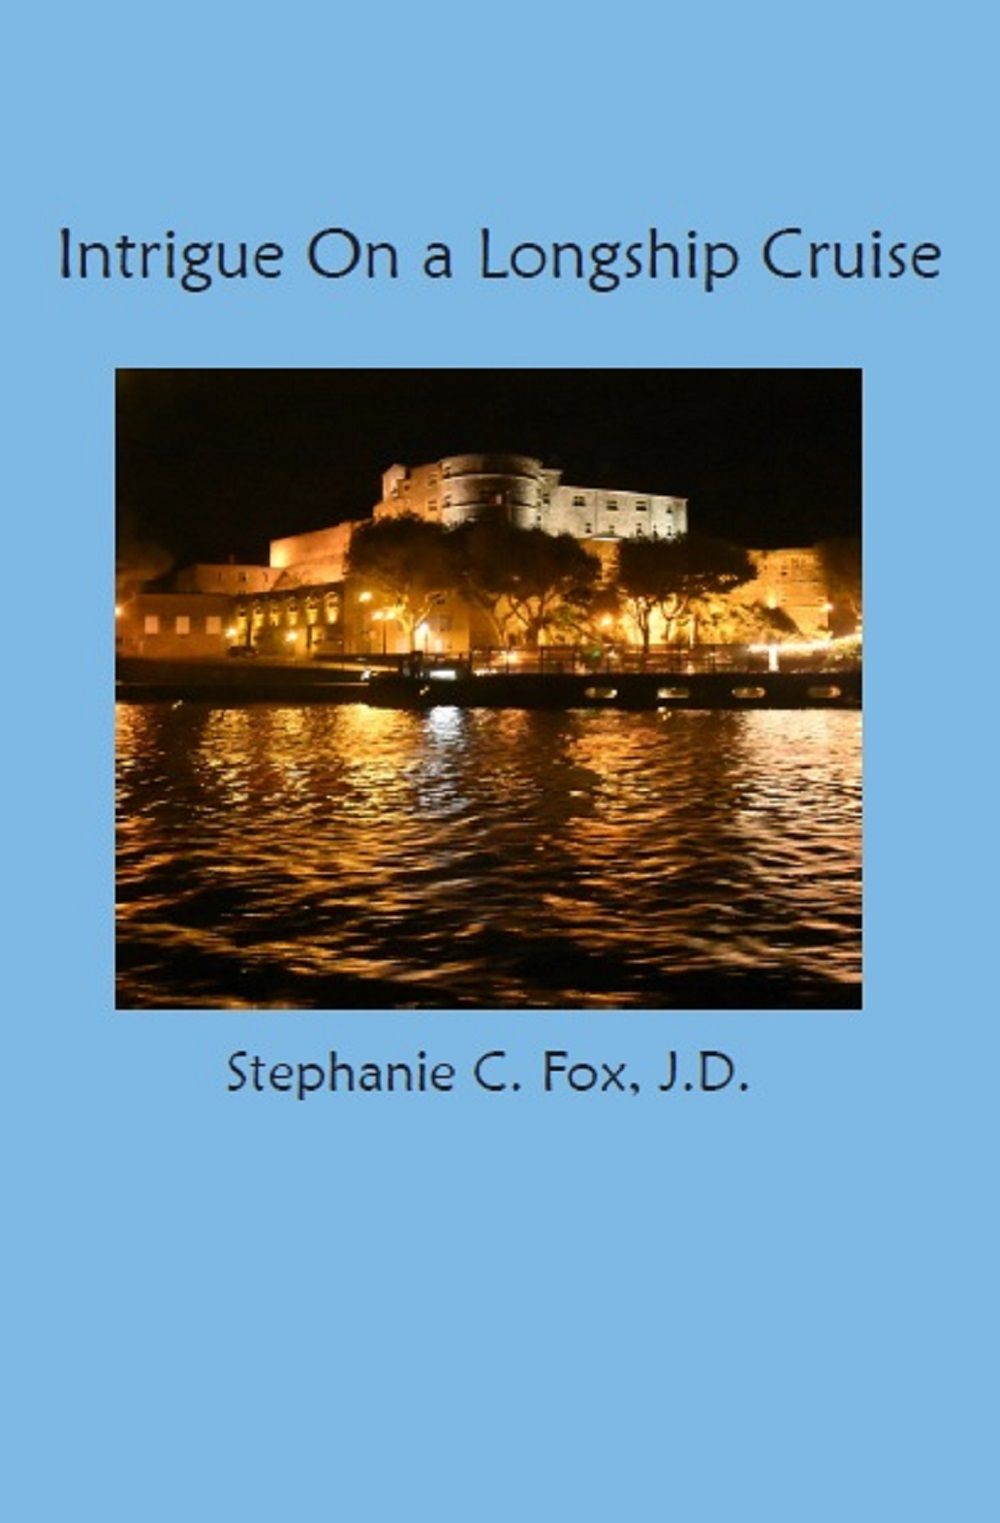 Intrigue On a Longship Cruise's Book Image